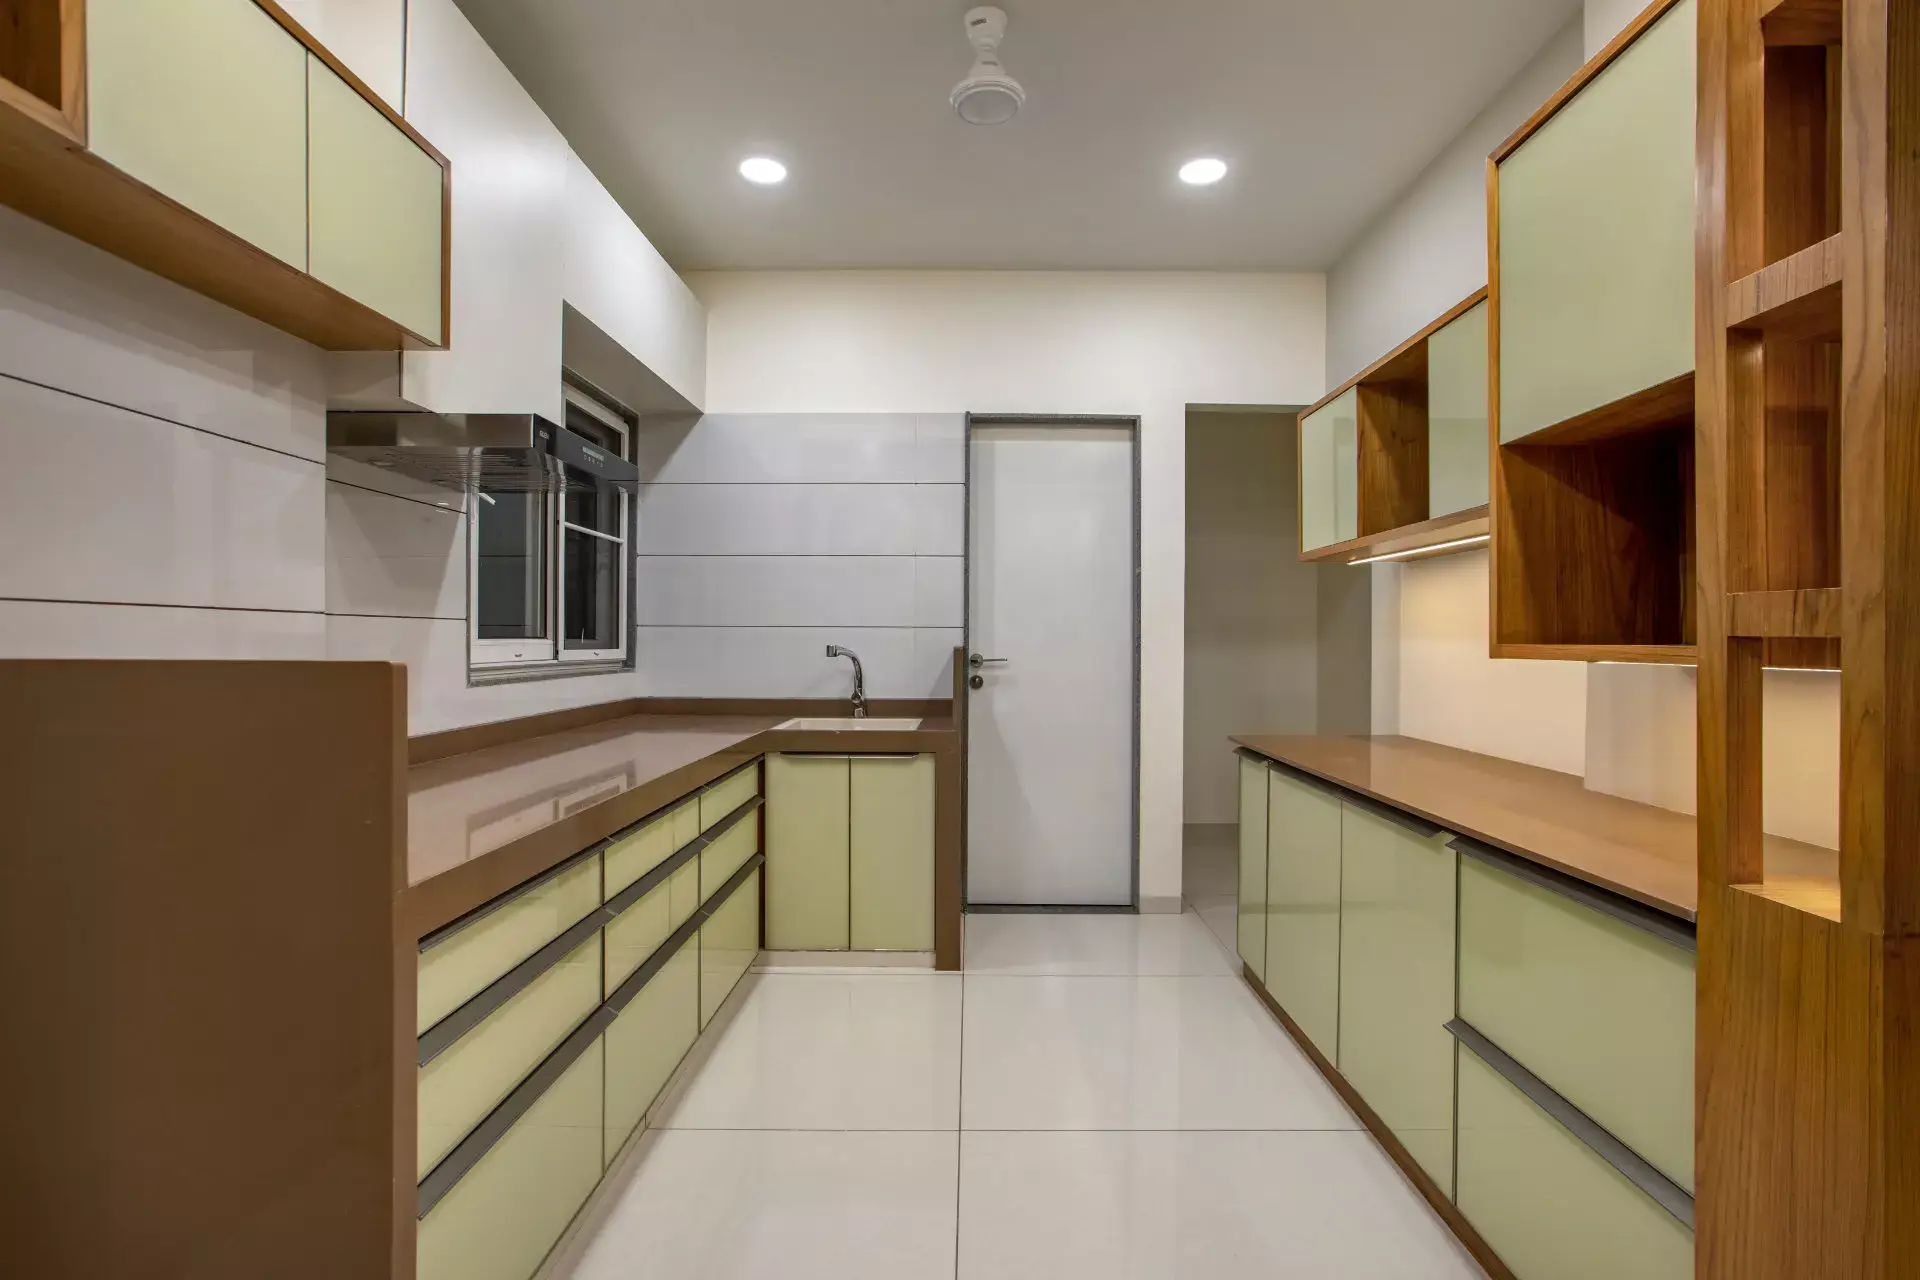 3BHK SAMPLE UNIT FLATS (ACTUAL PICTURES)